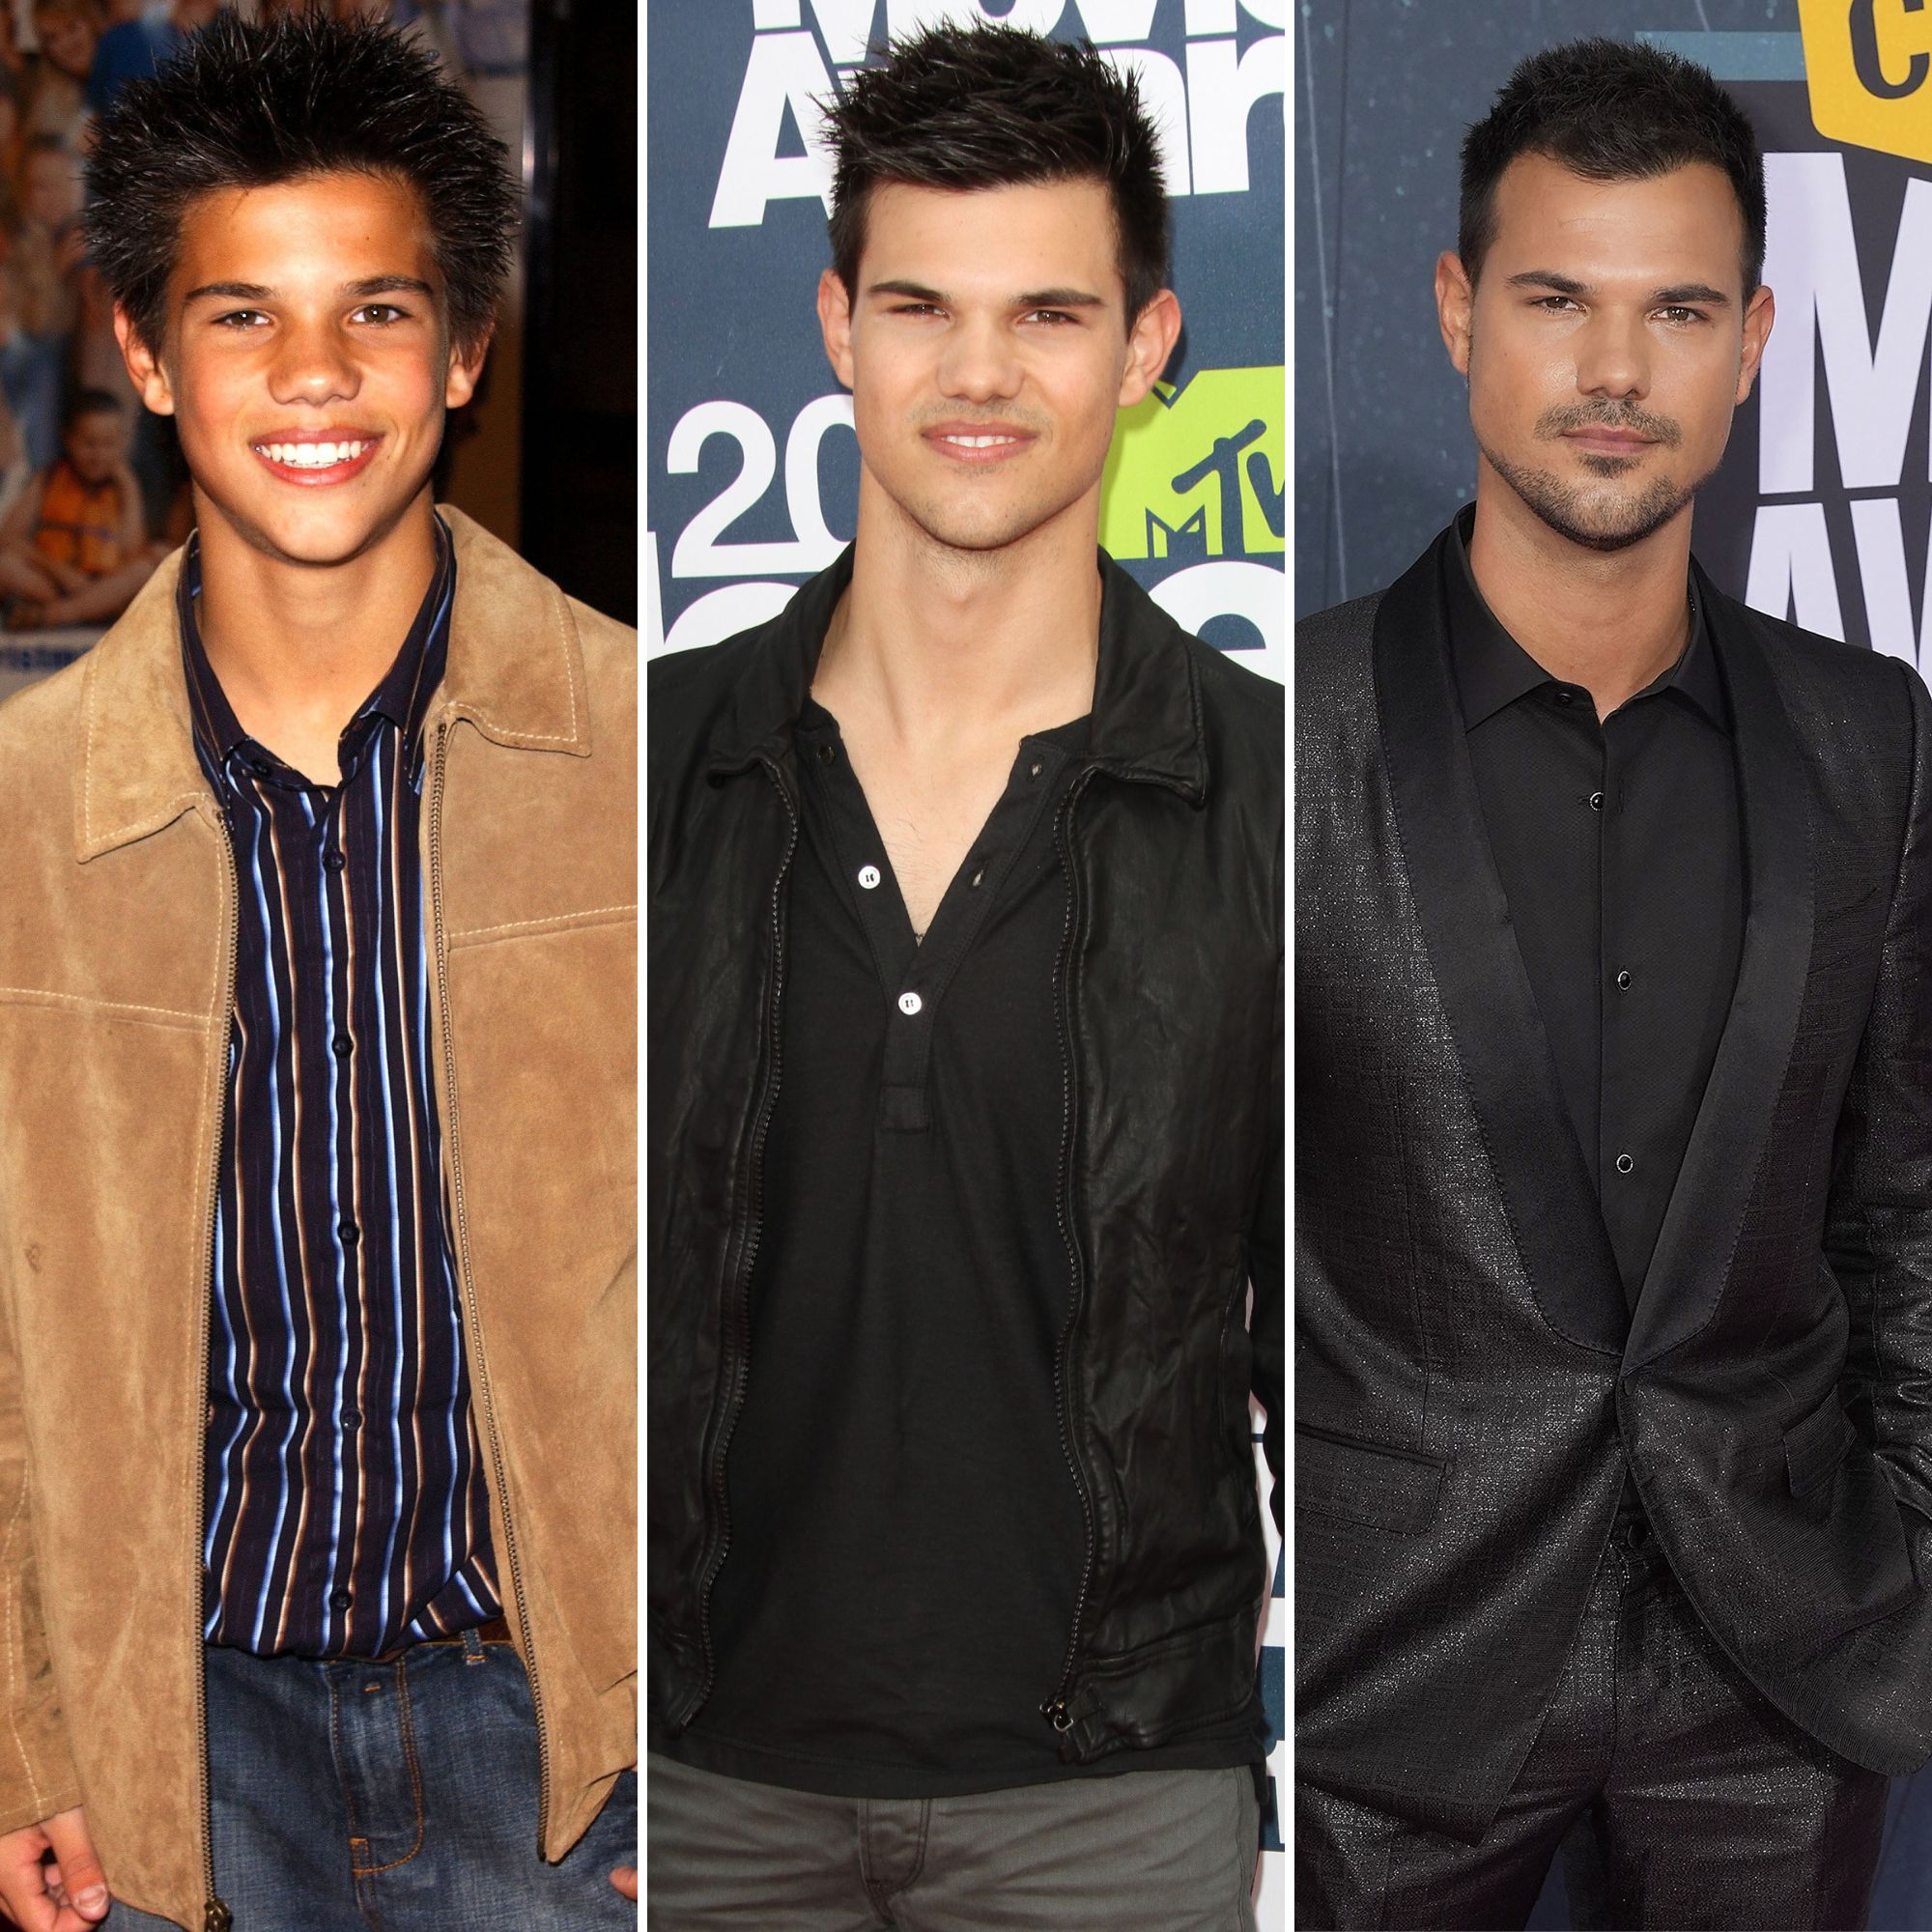 Taylor Lautner's Transformation From 'Twilight' to Now